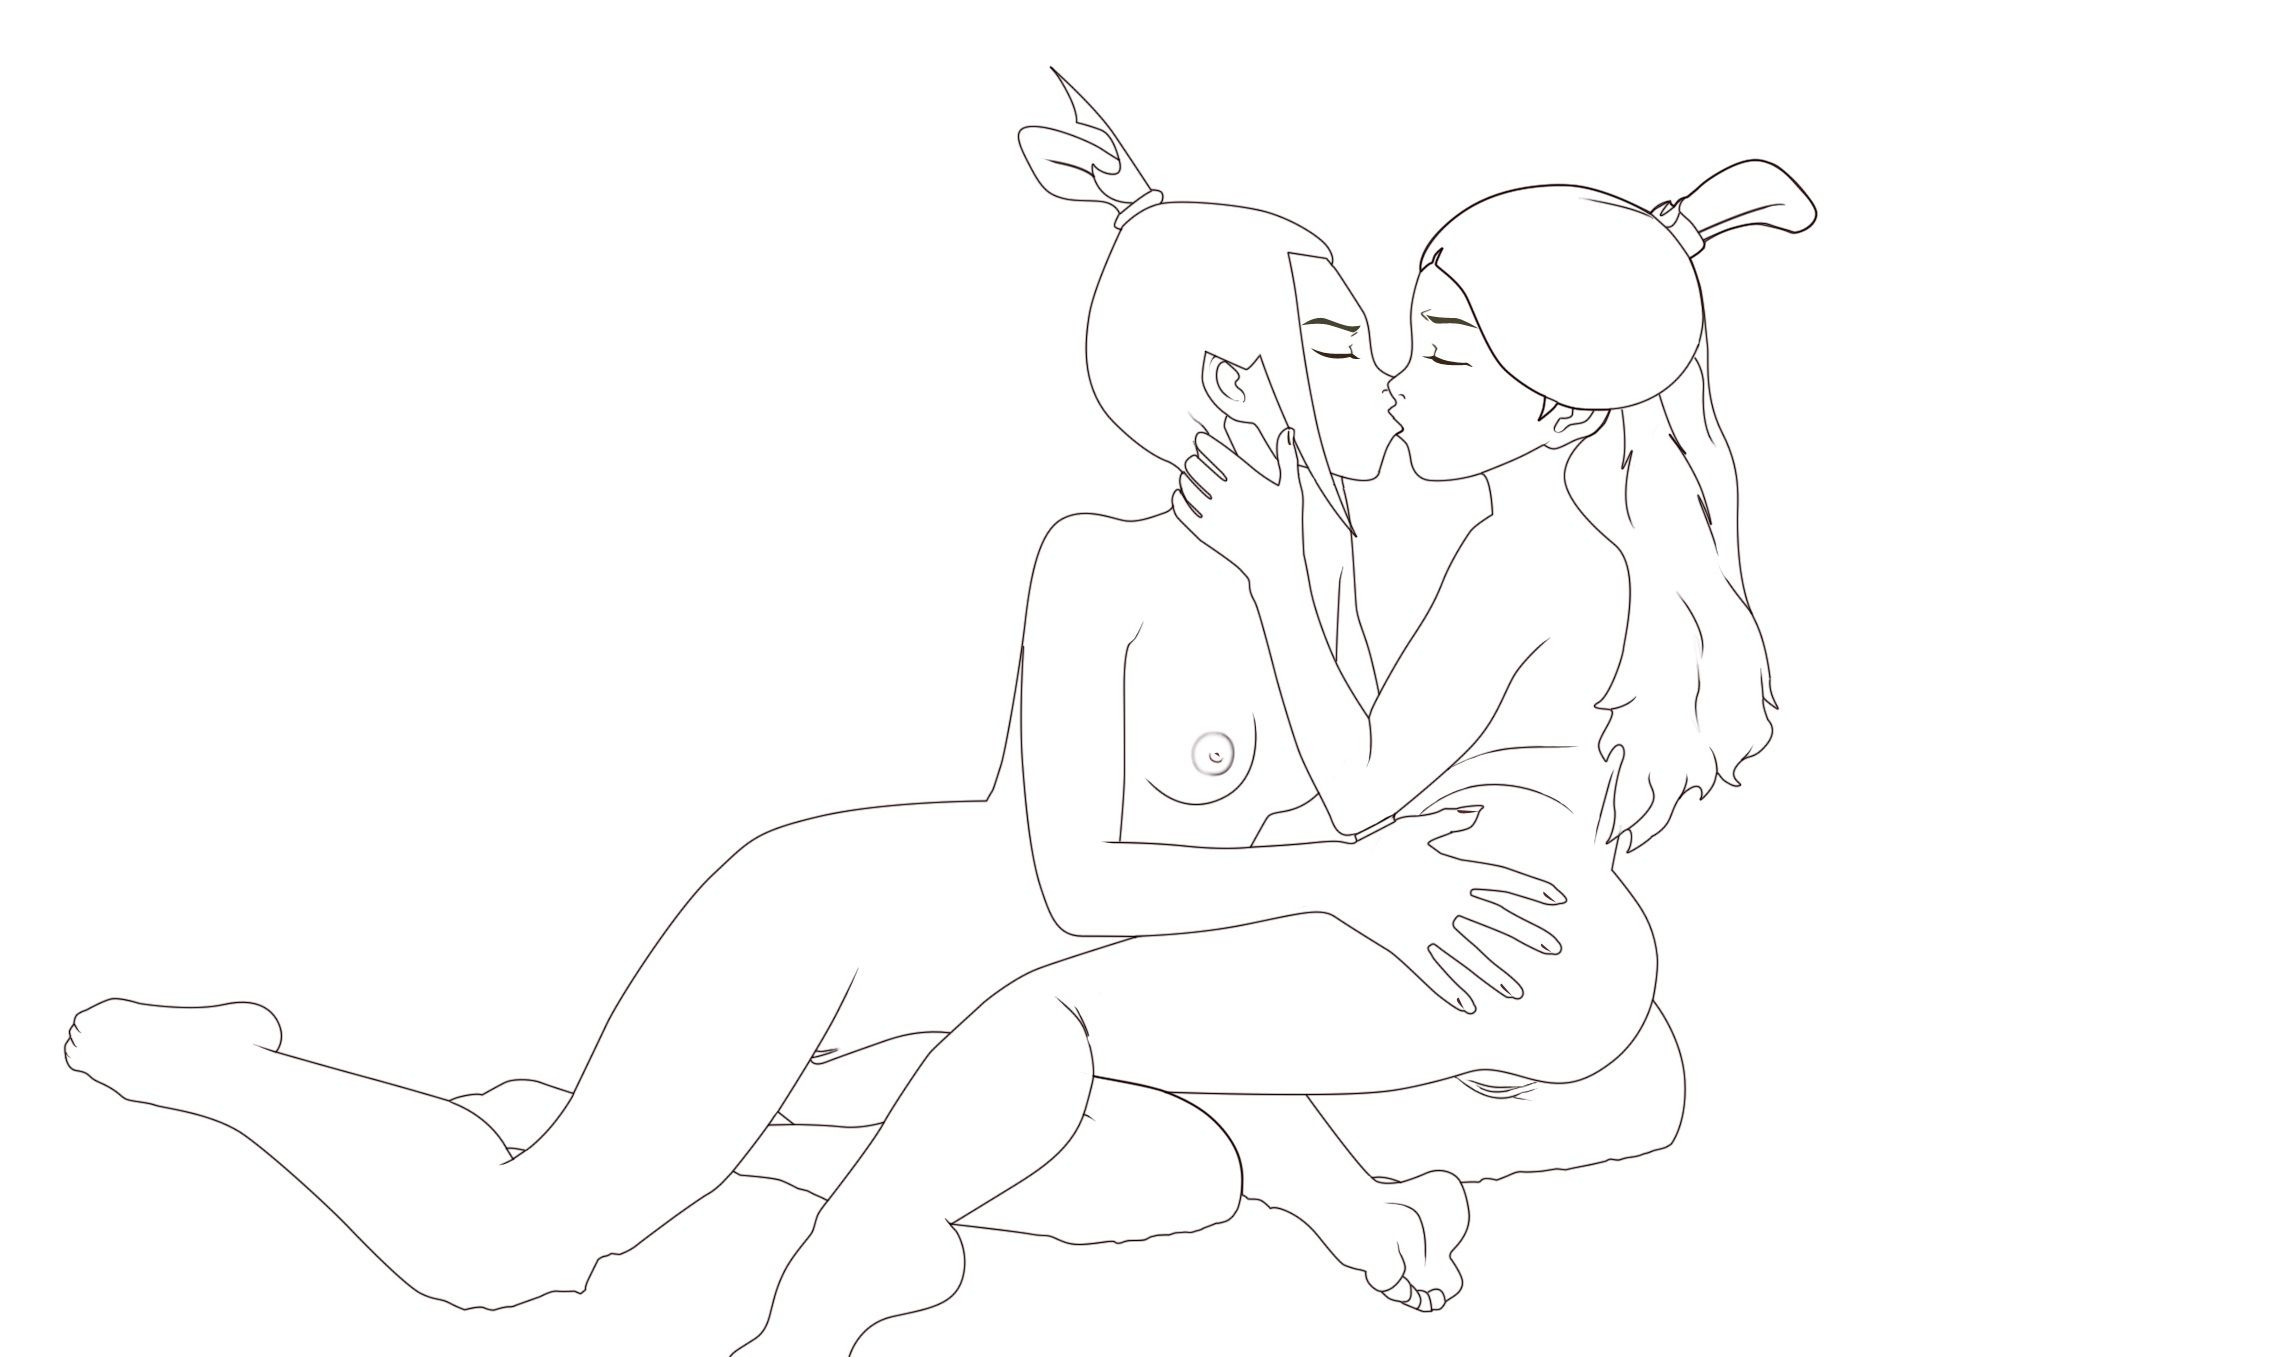 Lesbian games of sweet teens from your favorite cartoon